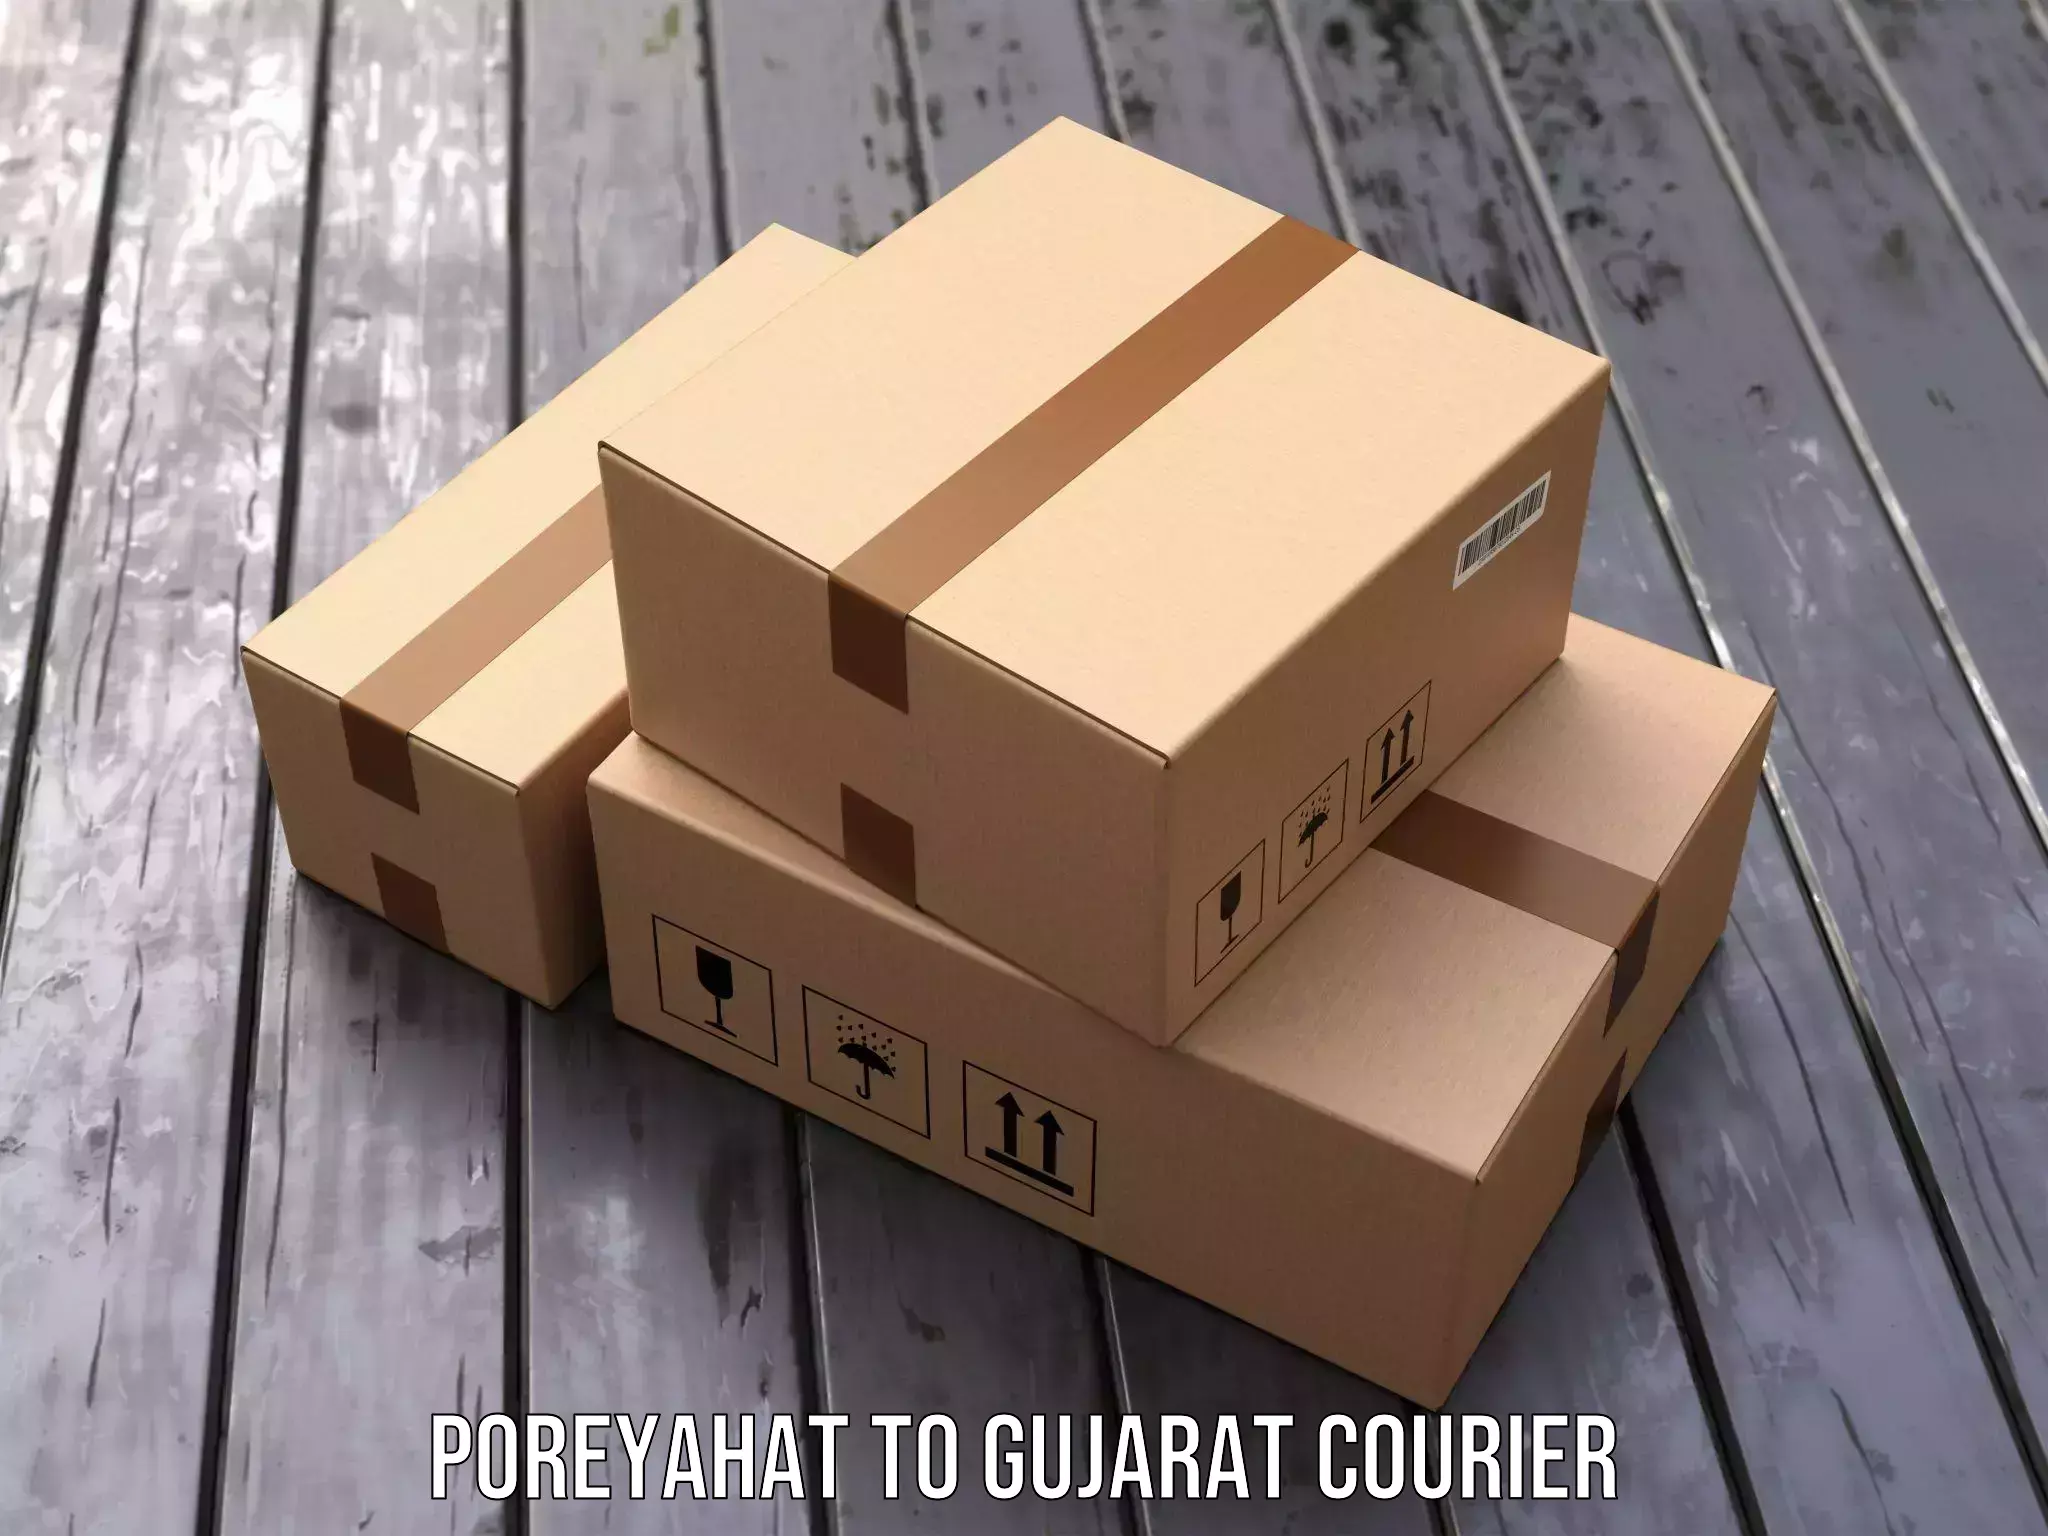 User-friendly delivery service Poreyahat to Gujarat